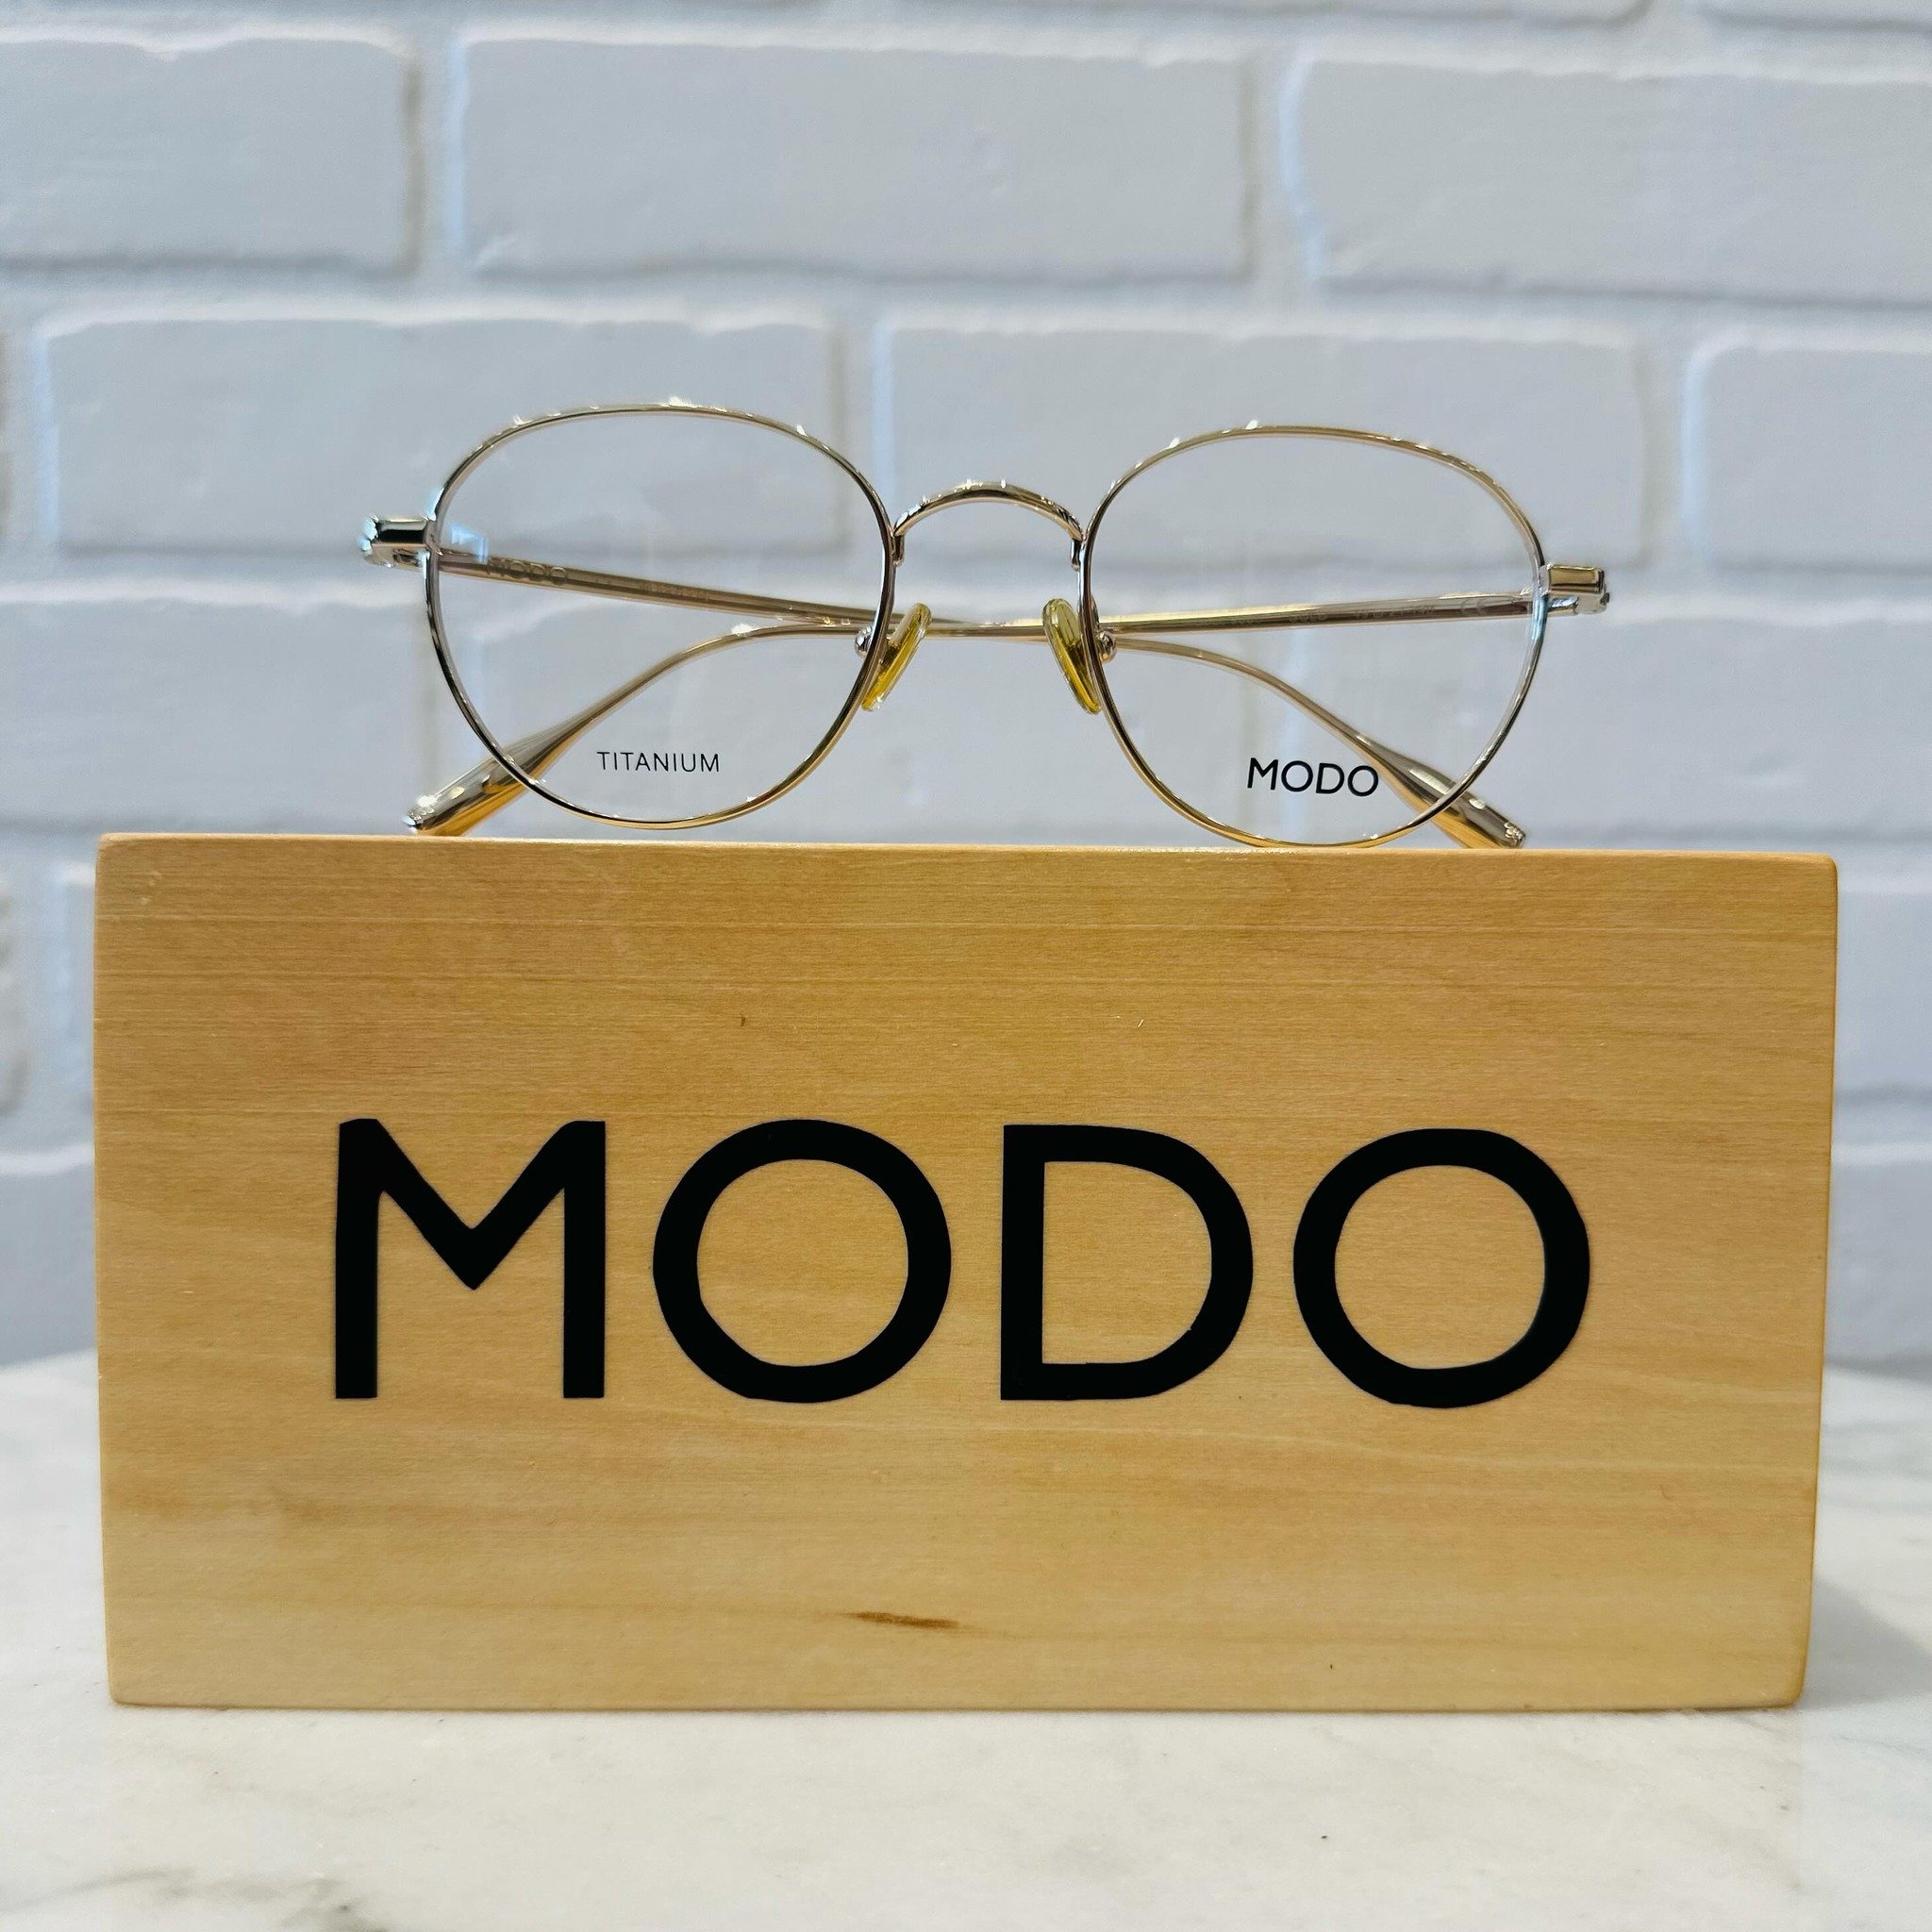 Talk about a classic that goes with everything!! 😍🙌🏻🤓 We love these gold, titanium frames for their lightweight feel and classic style! #modoeyewear #eyes #eyeexam #eyeglasses #glasses #sunglasses #eyedoctor #optometrist #optometry #spectacle #sp